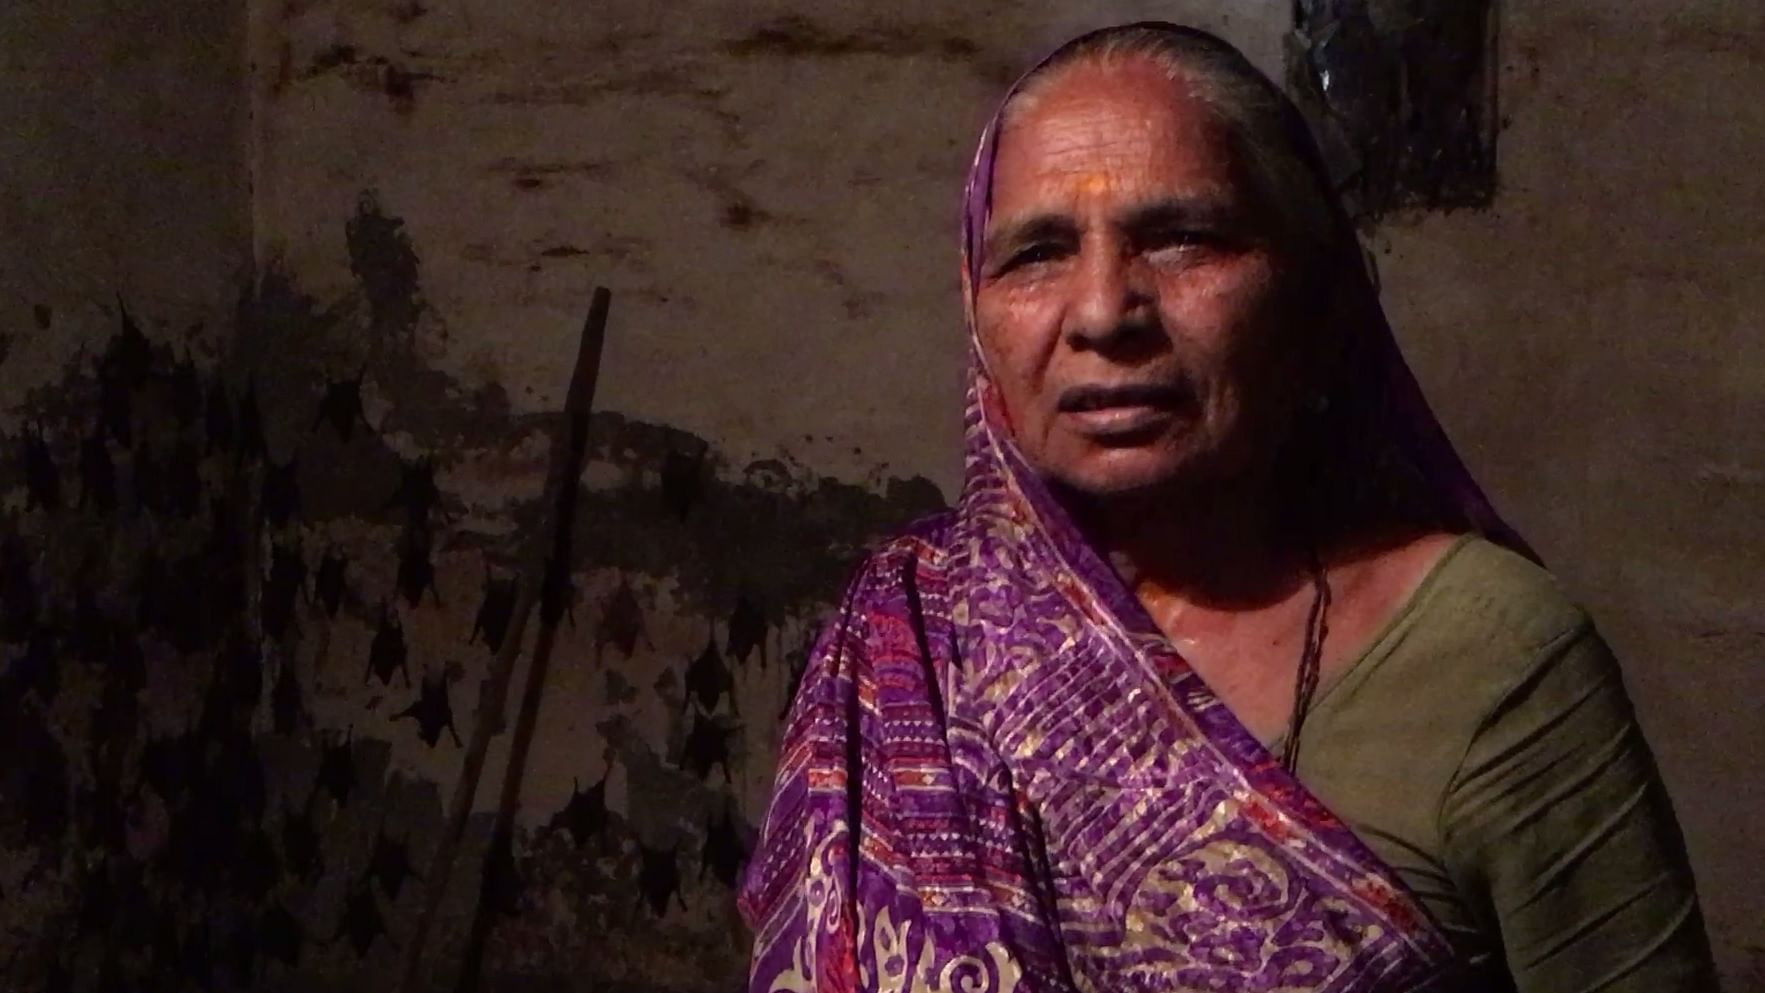 Shantaben Prajapati has been living with 1,000 bats for 5 years now, and says it would be a sin to kill them.